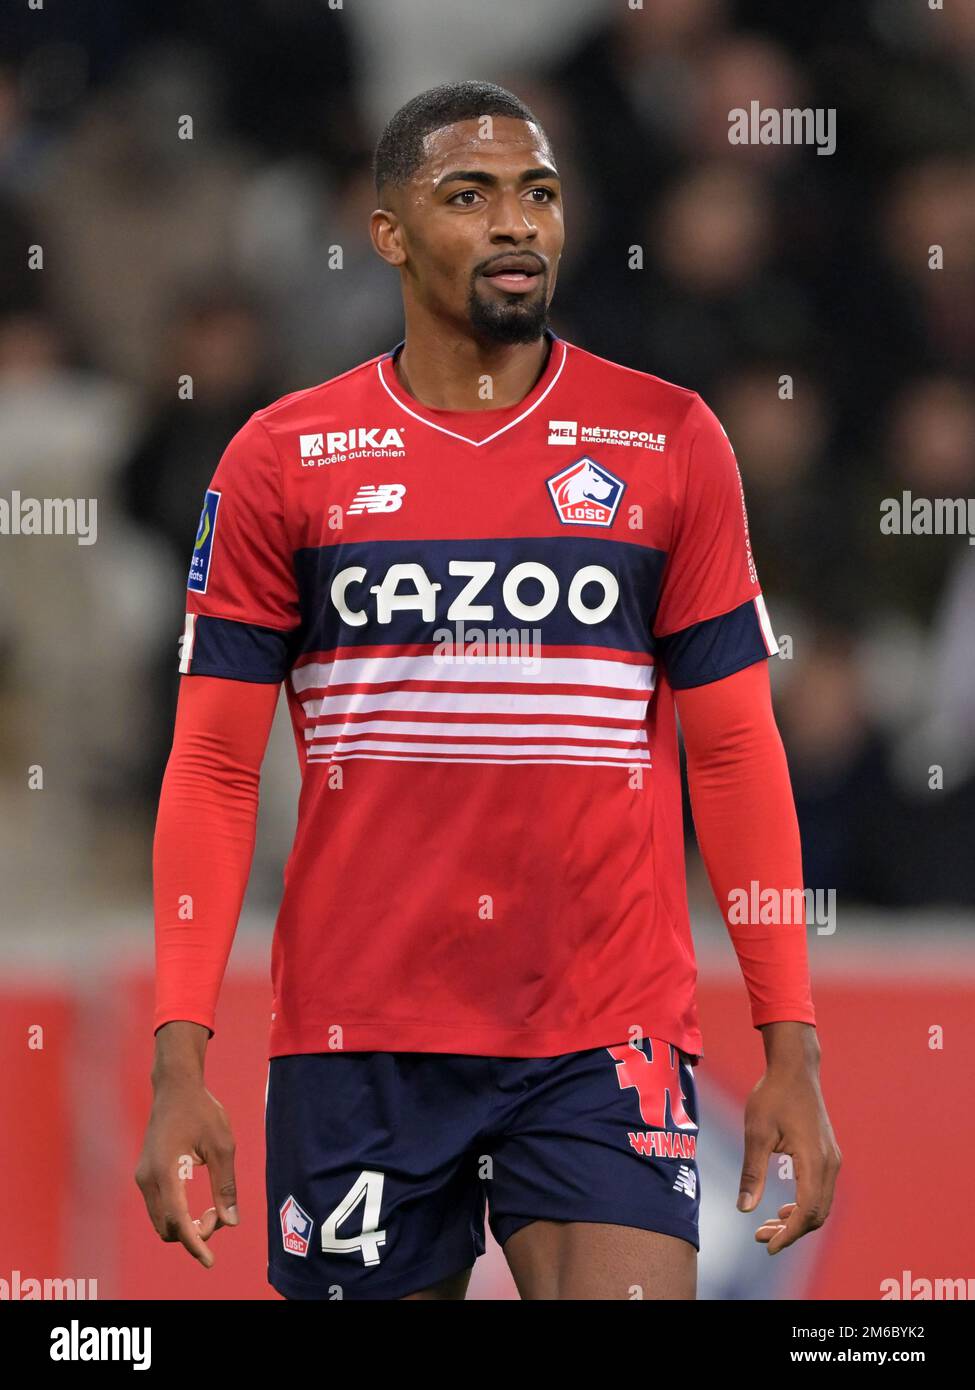 LILLE - Alexsandro of LOSC Lille during the French Ligue 1 match between Lille OSC and Stade de Reims at Pierre-Mauroy Stadium on January 2, 2022 in Lille, France. AP | Dutch Height | Gerrit van Cologne Stock Photo